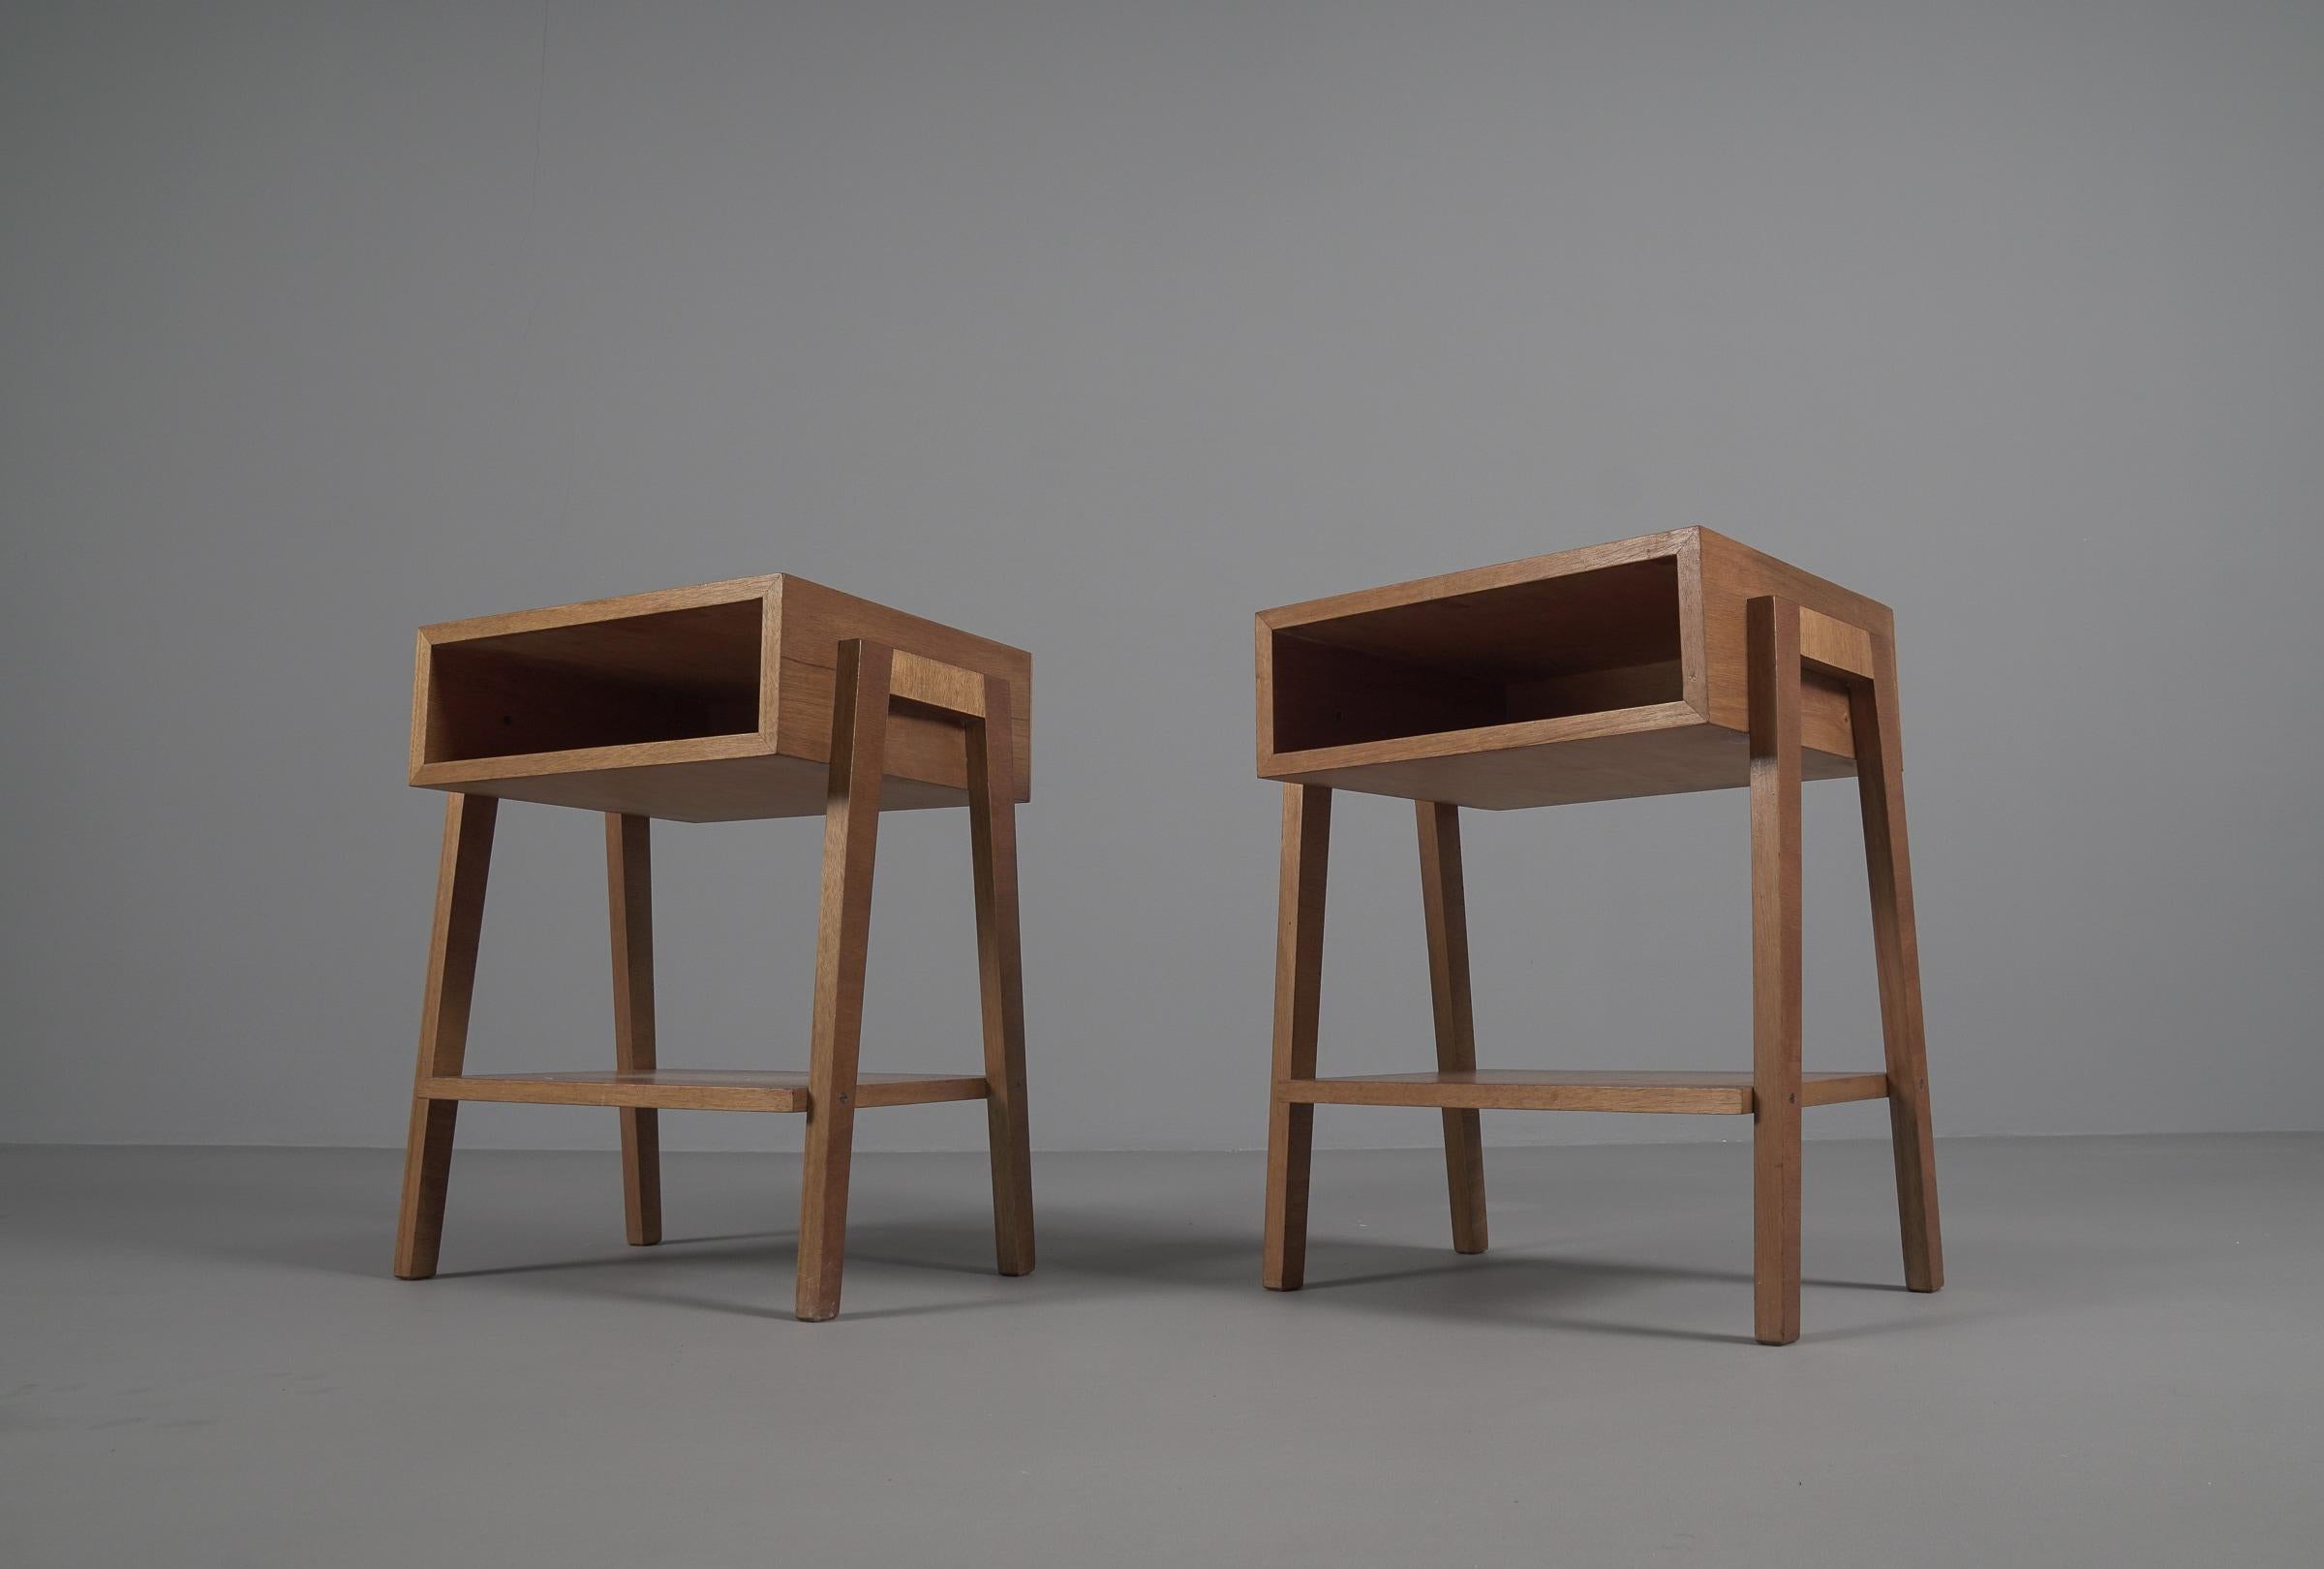  Pair of Minimalistic Mid-Century Modern Wooden Nightstands, Italy 1950s For Sale 1